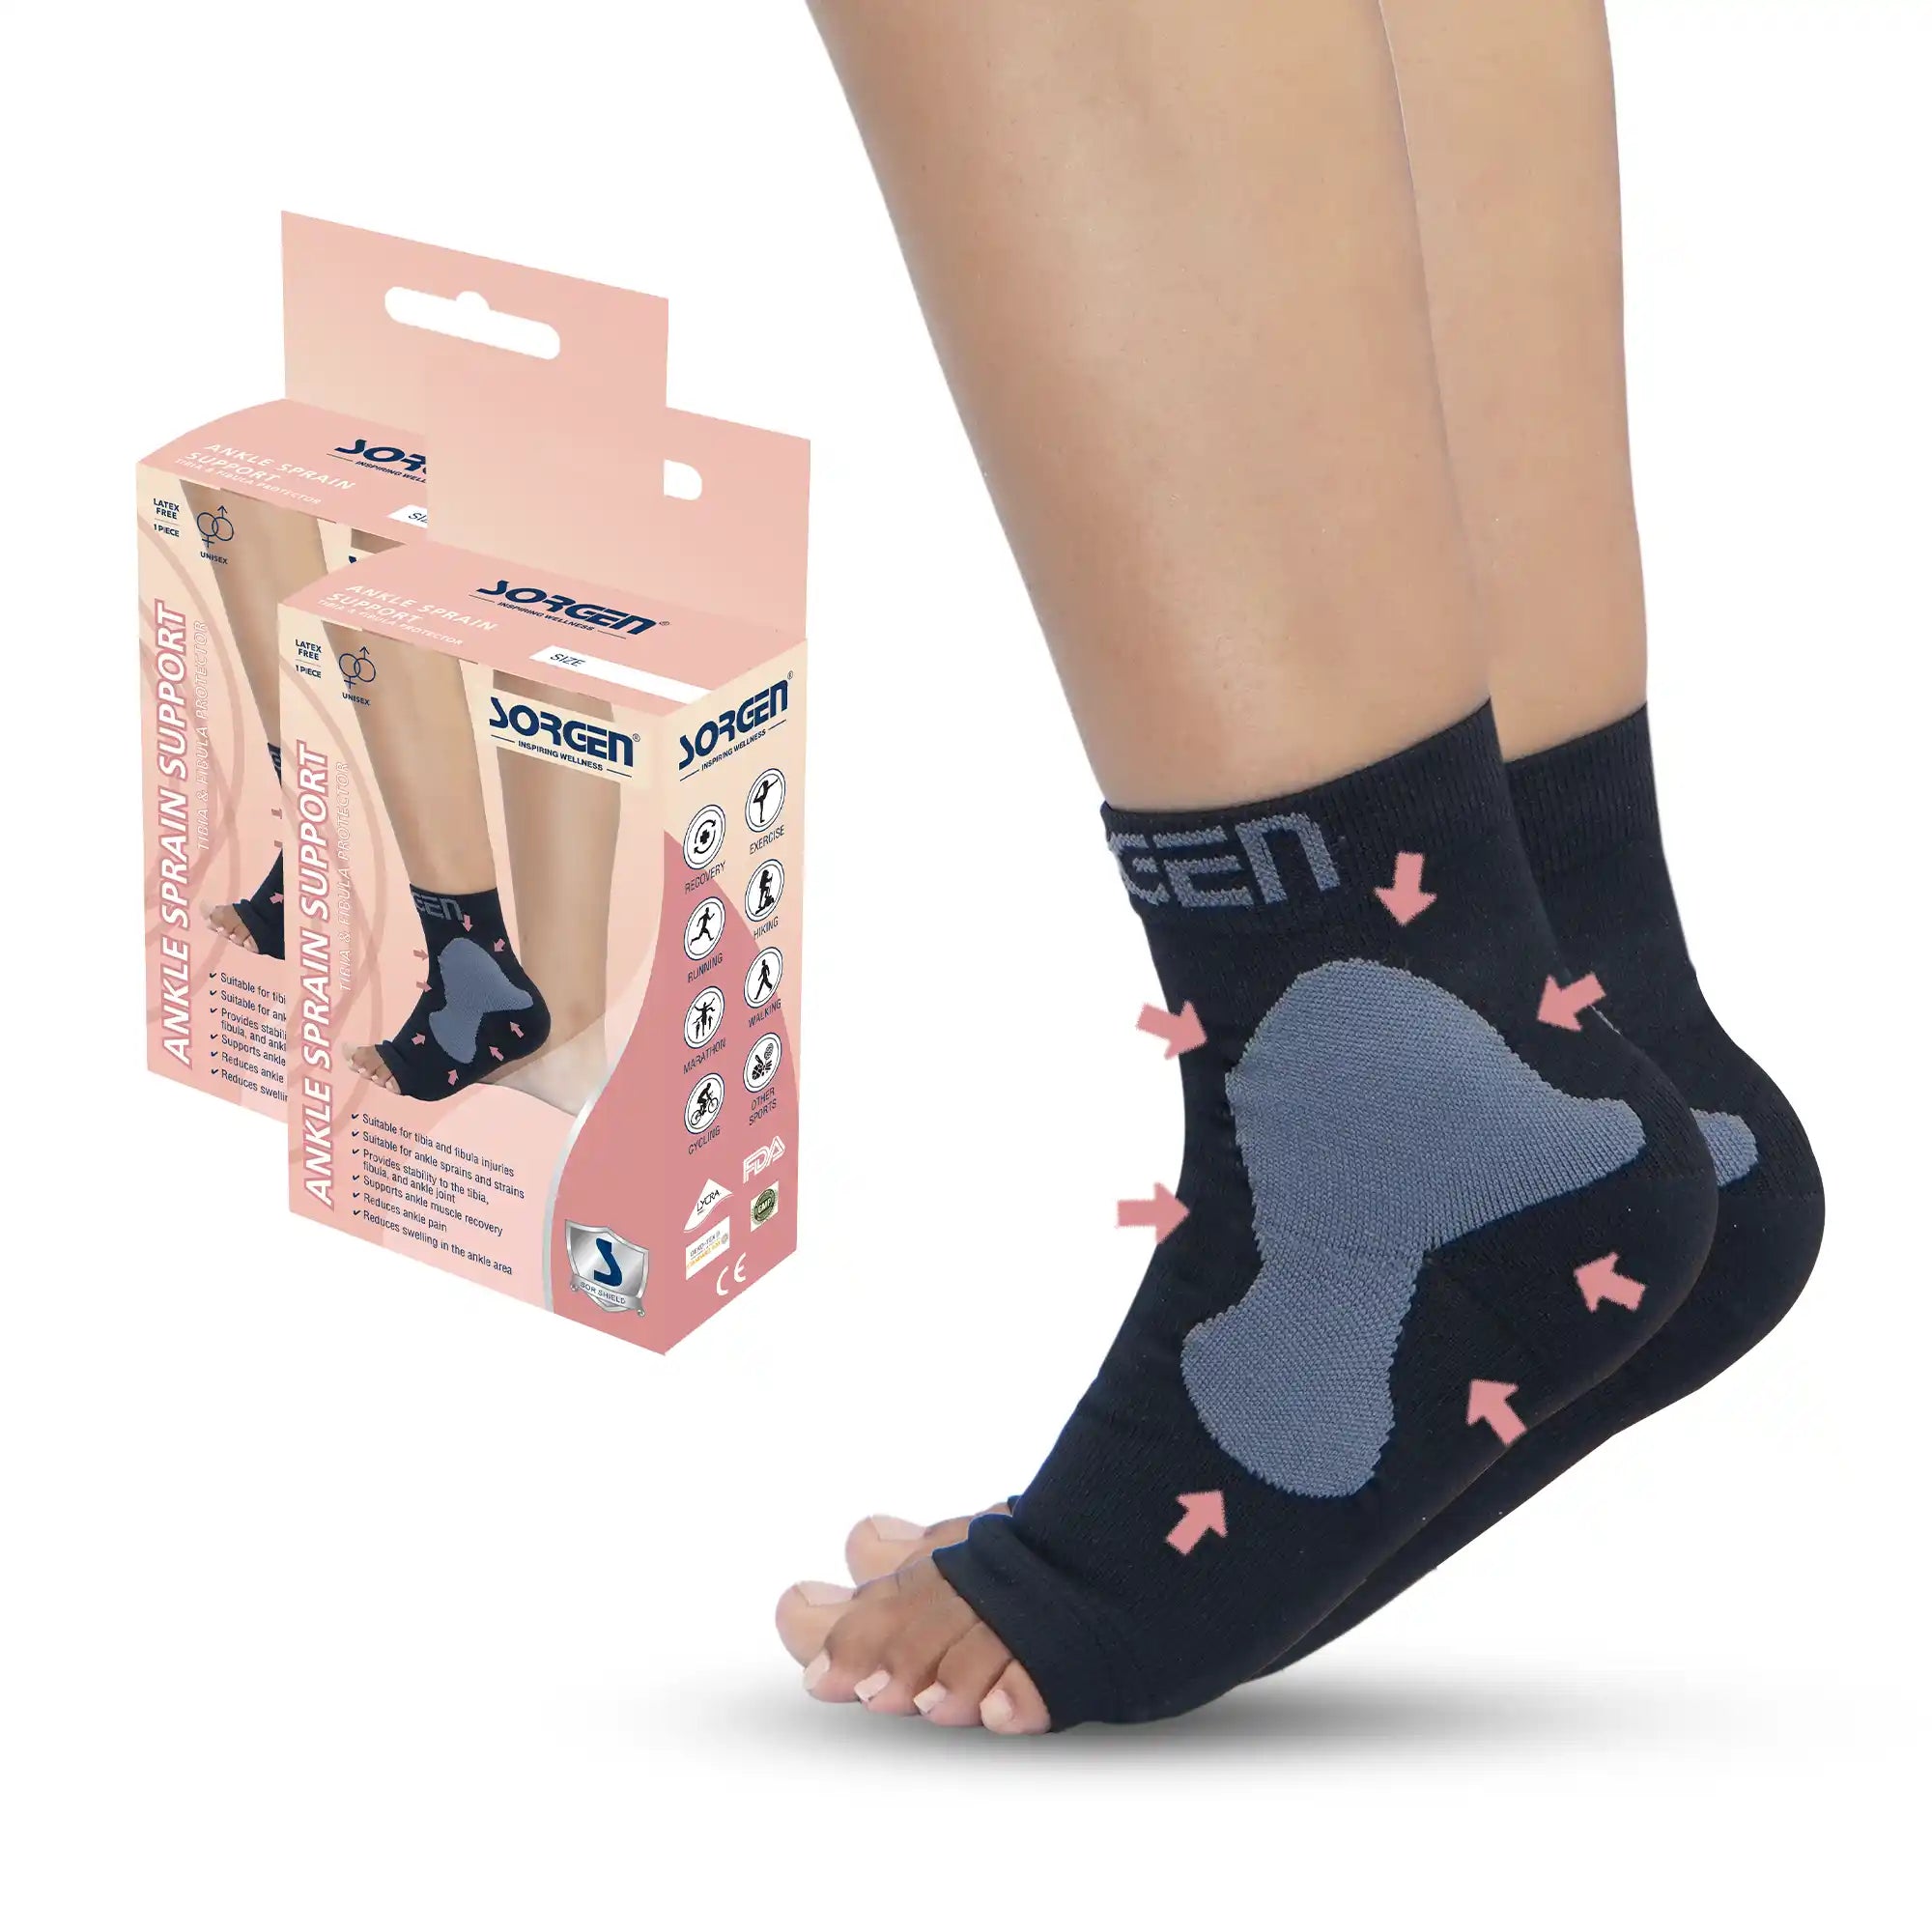 ankle support for sprain